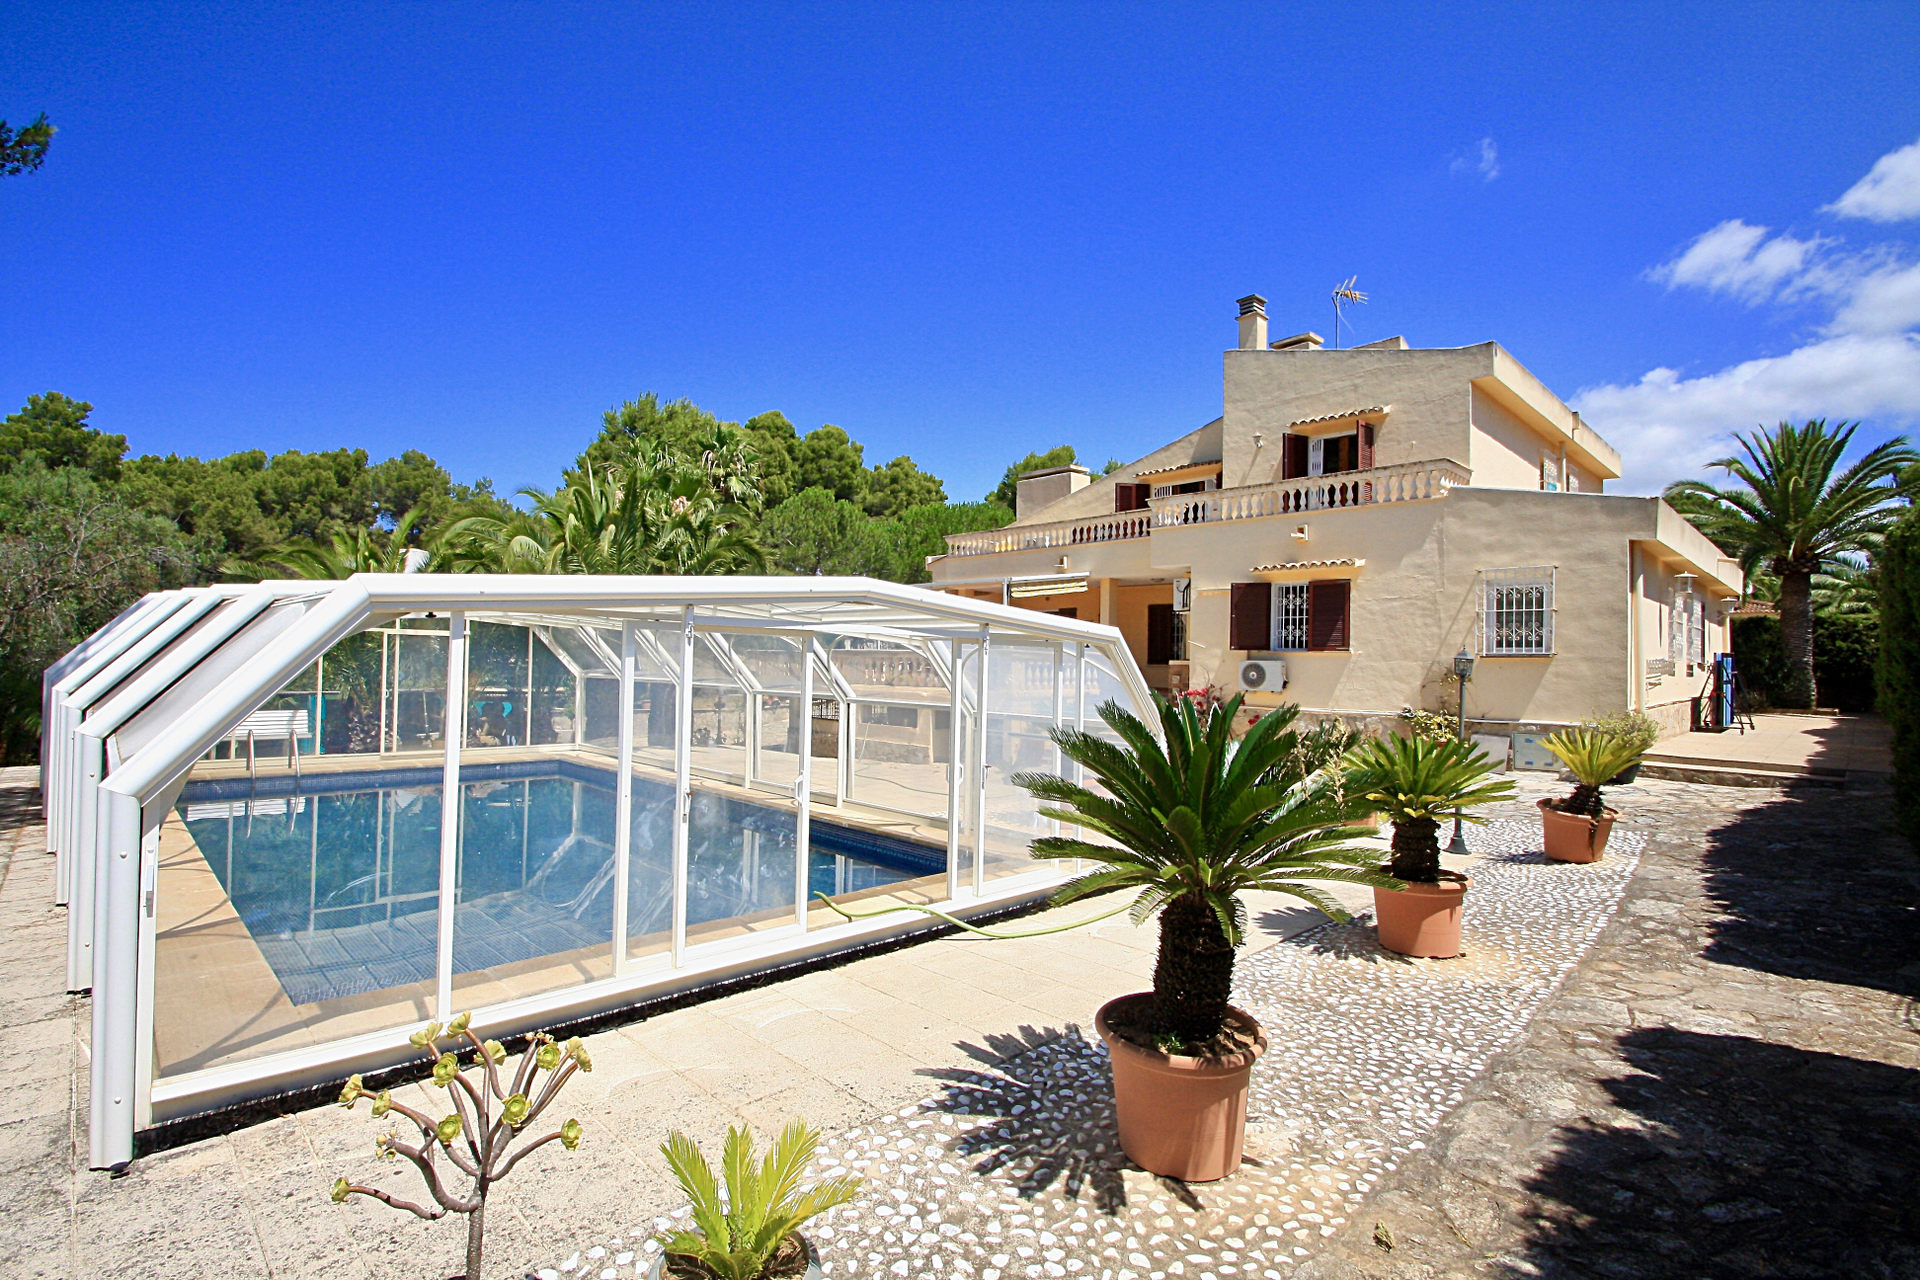 Santa Ponsa: family house located on a large flat plot with a covered pool